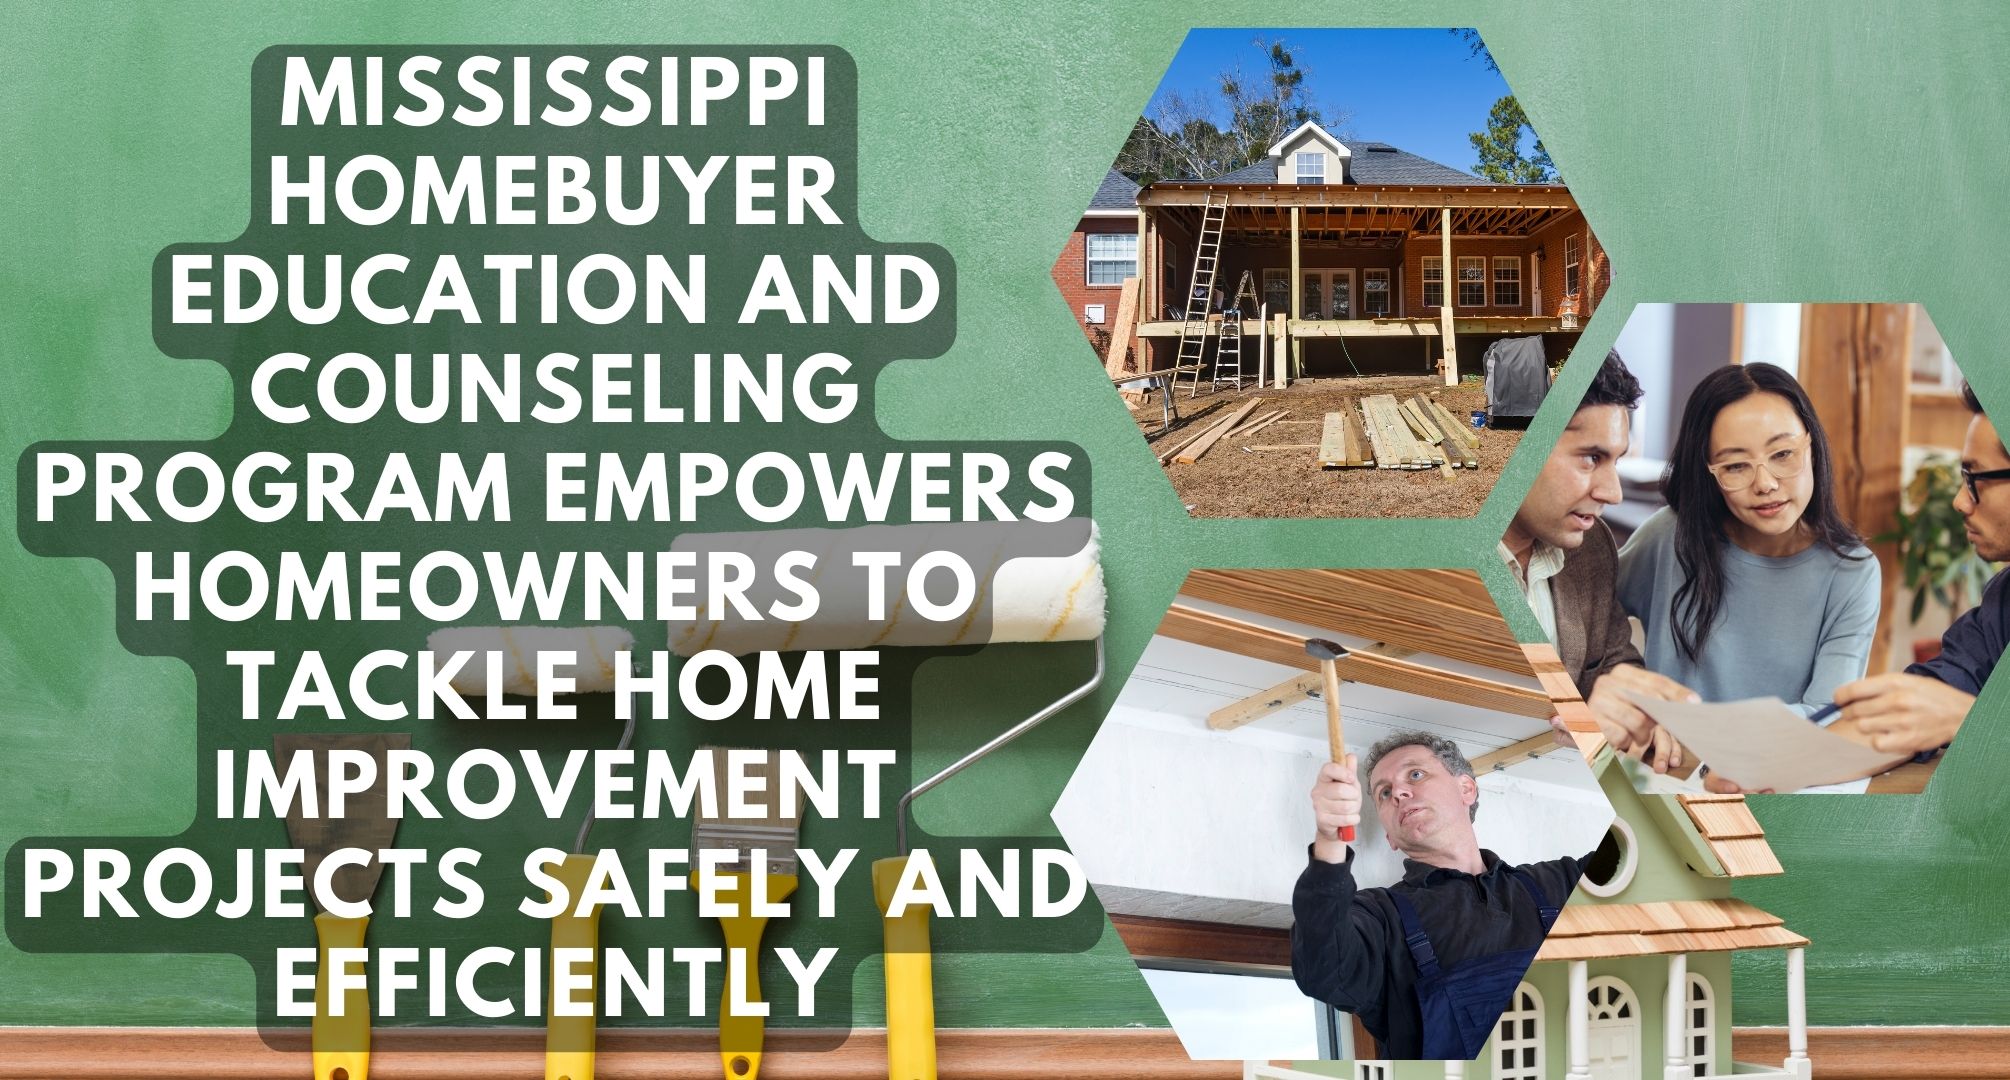 Mississippi Homebuyer Education and Counseling Program Empowers Homeowners to Tackle Home Improvement Projects Safely and Efficiently